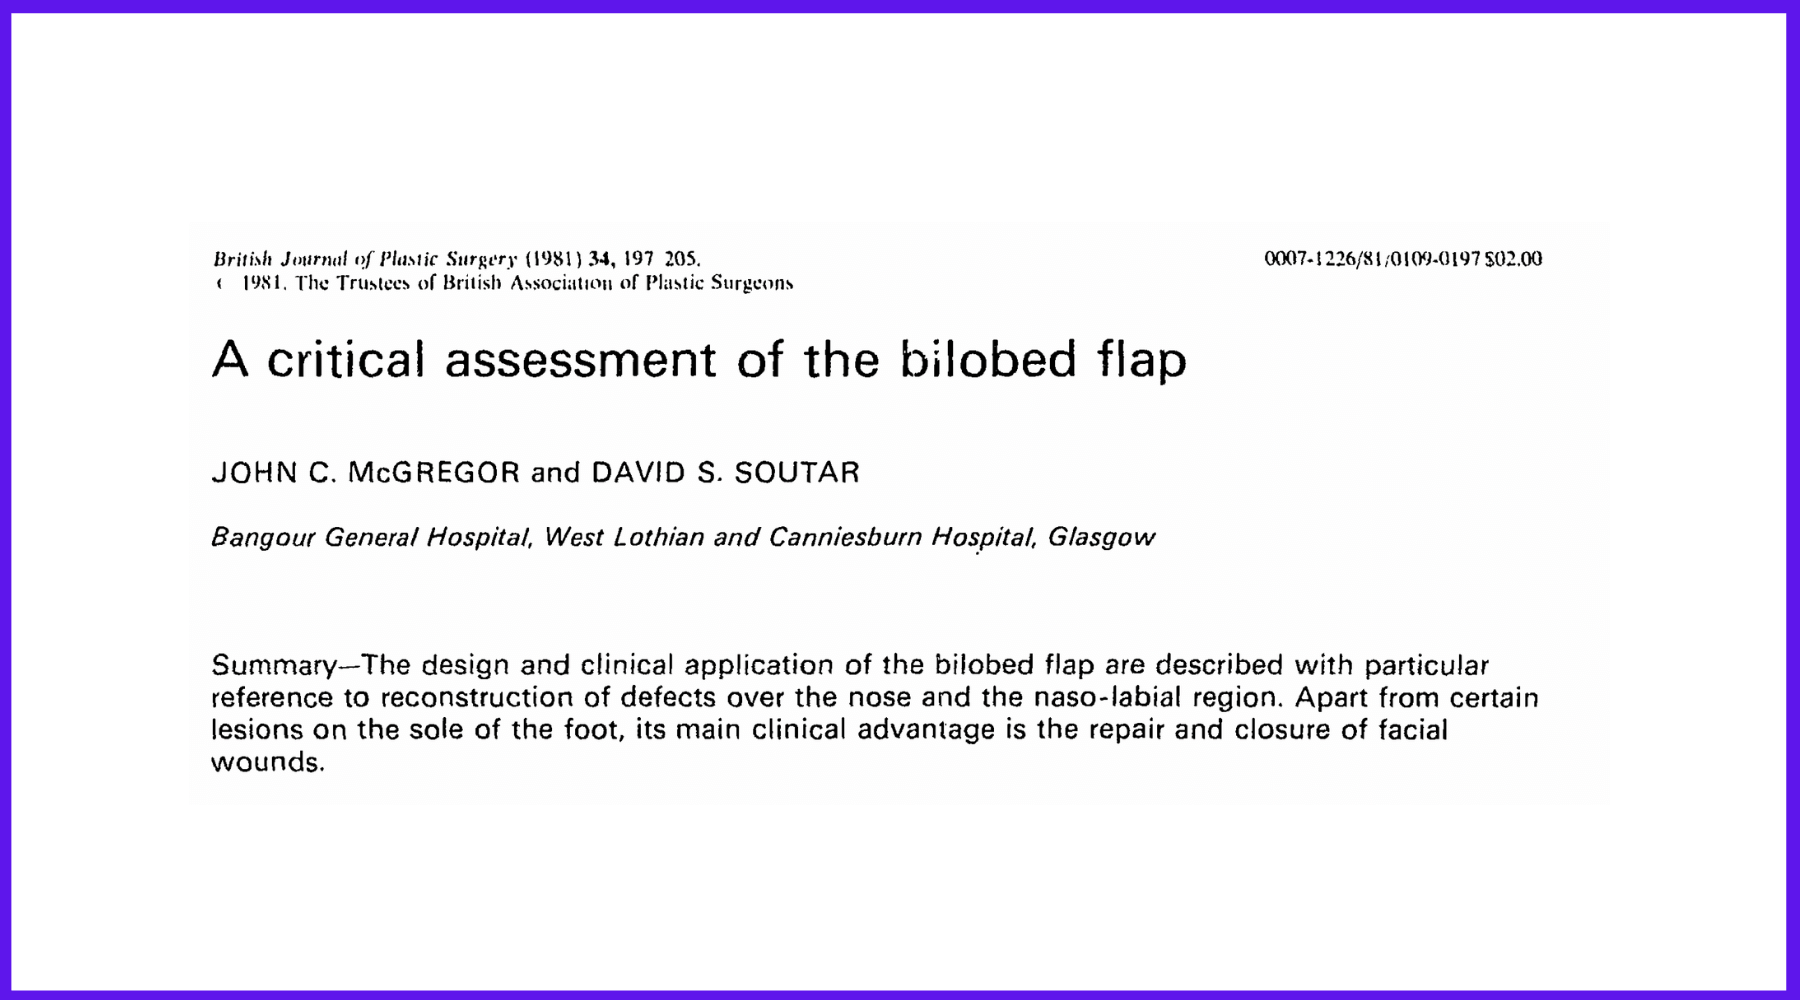 McGregor and Soutar's publication on their modification of the Bilobed Flap